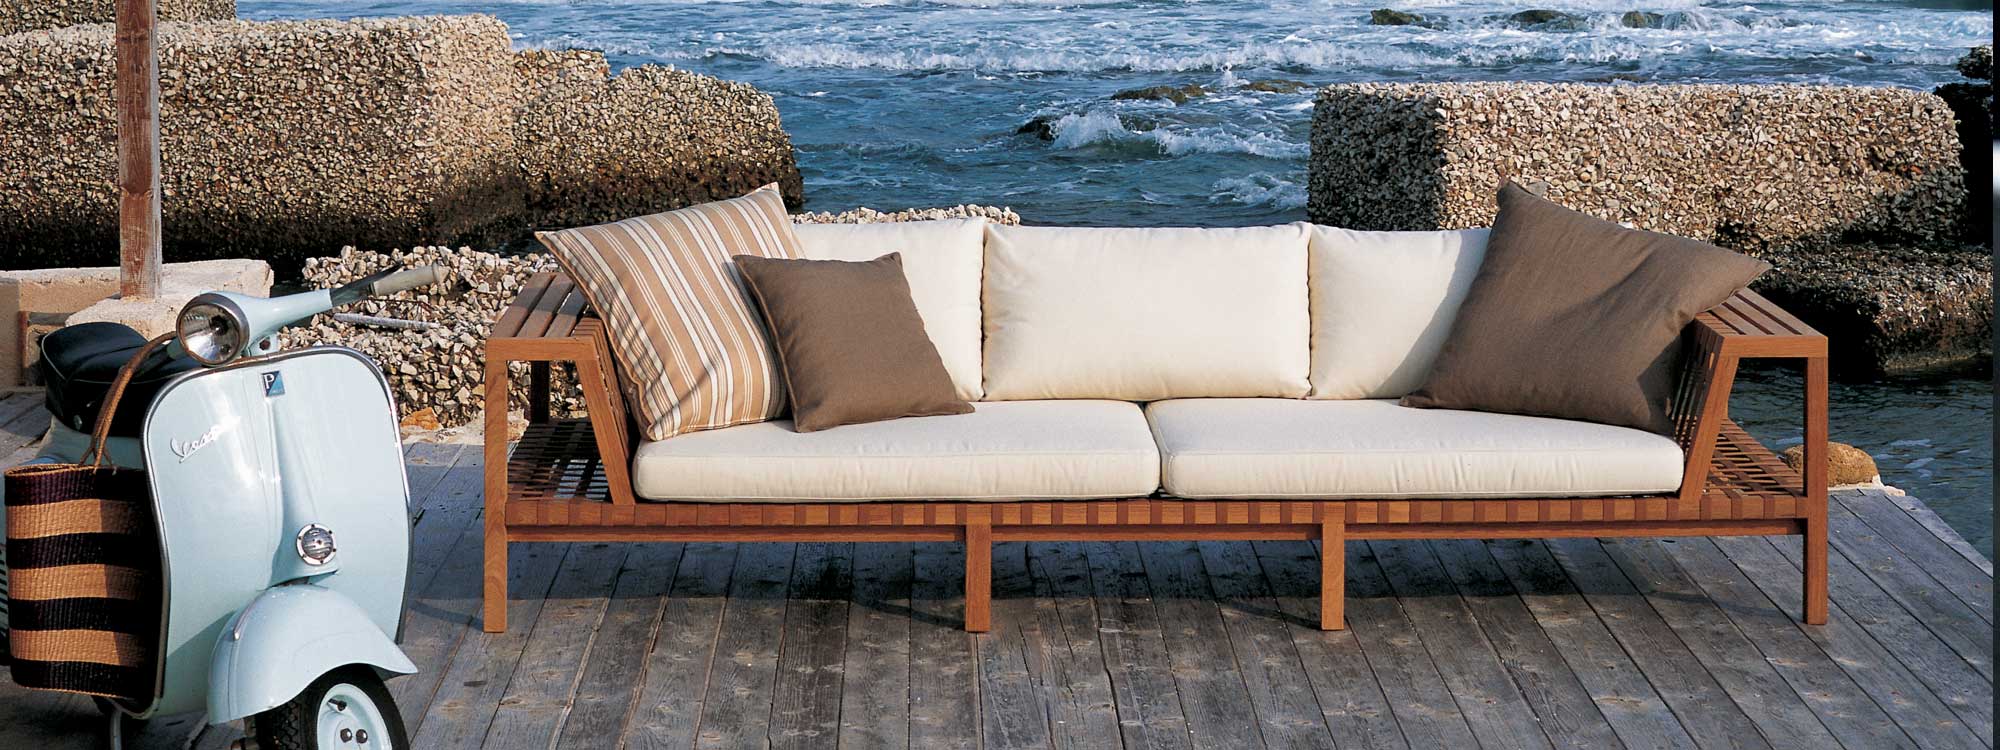 Network teak sofa with Tobacco webbing and White cushions with breaking waves in the background